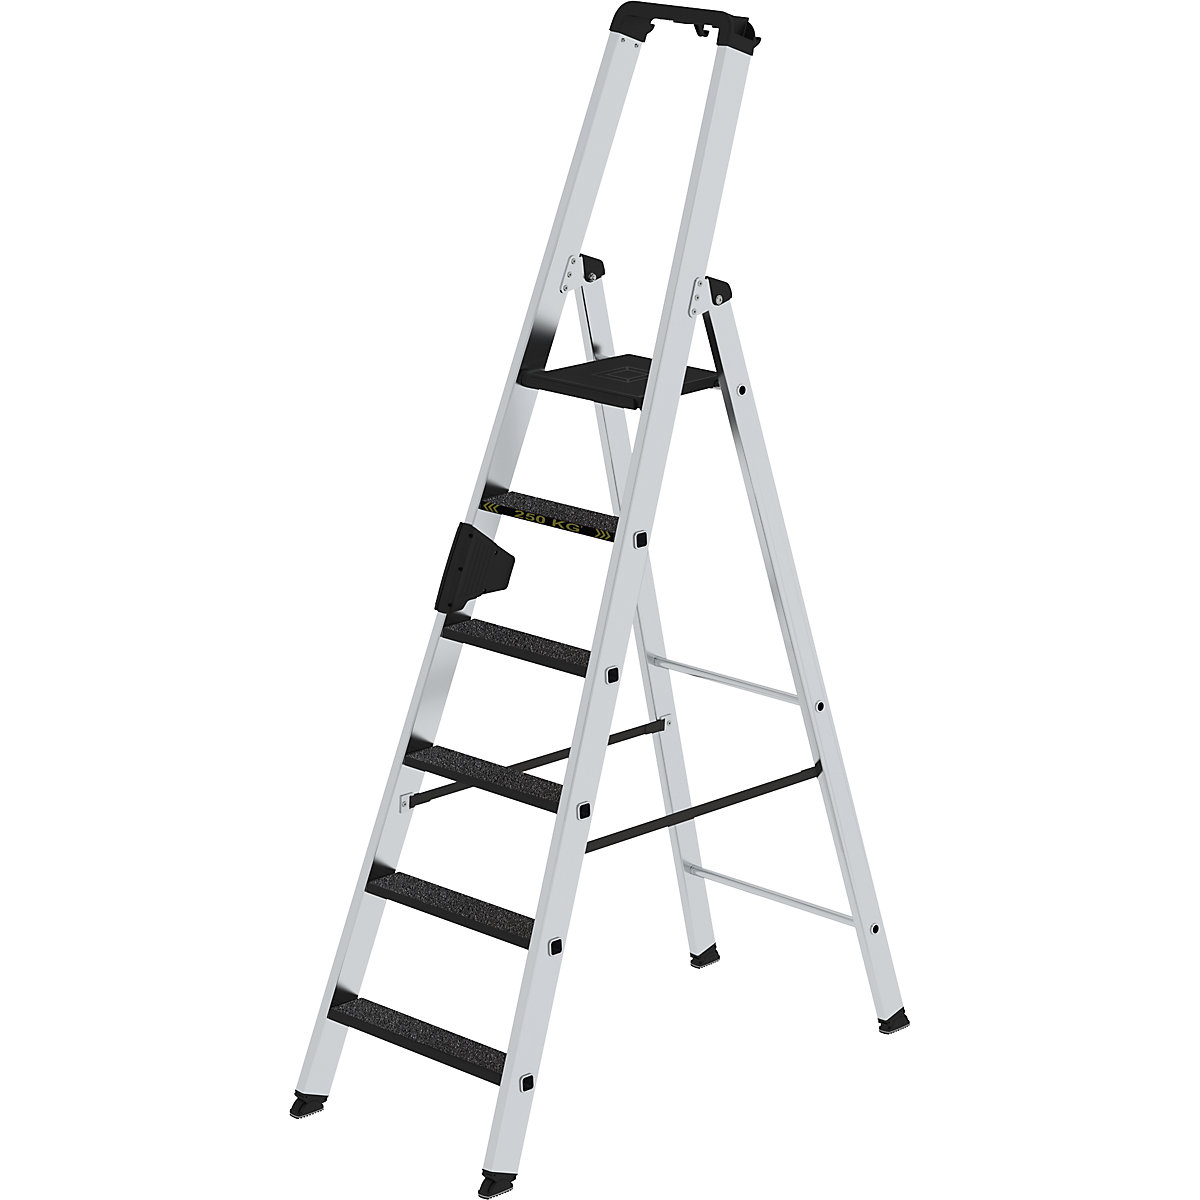 CLIP-STEP step ladder – MUNK, single sided access, slip resistant R13, durable, 6 steps-8